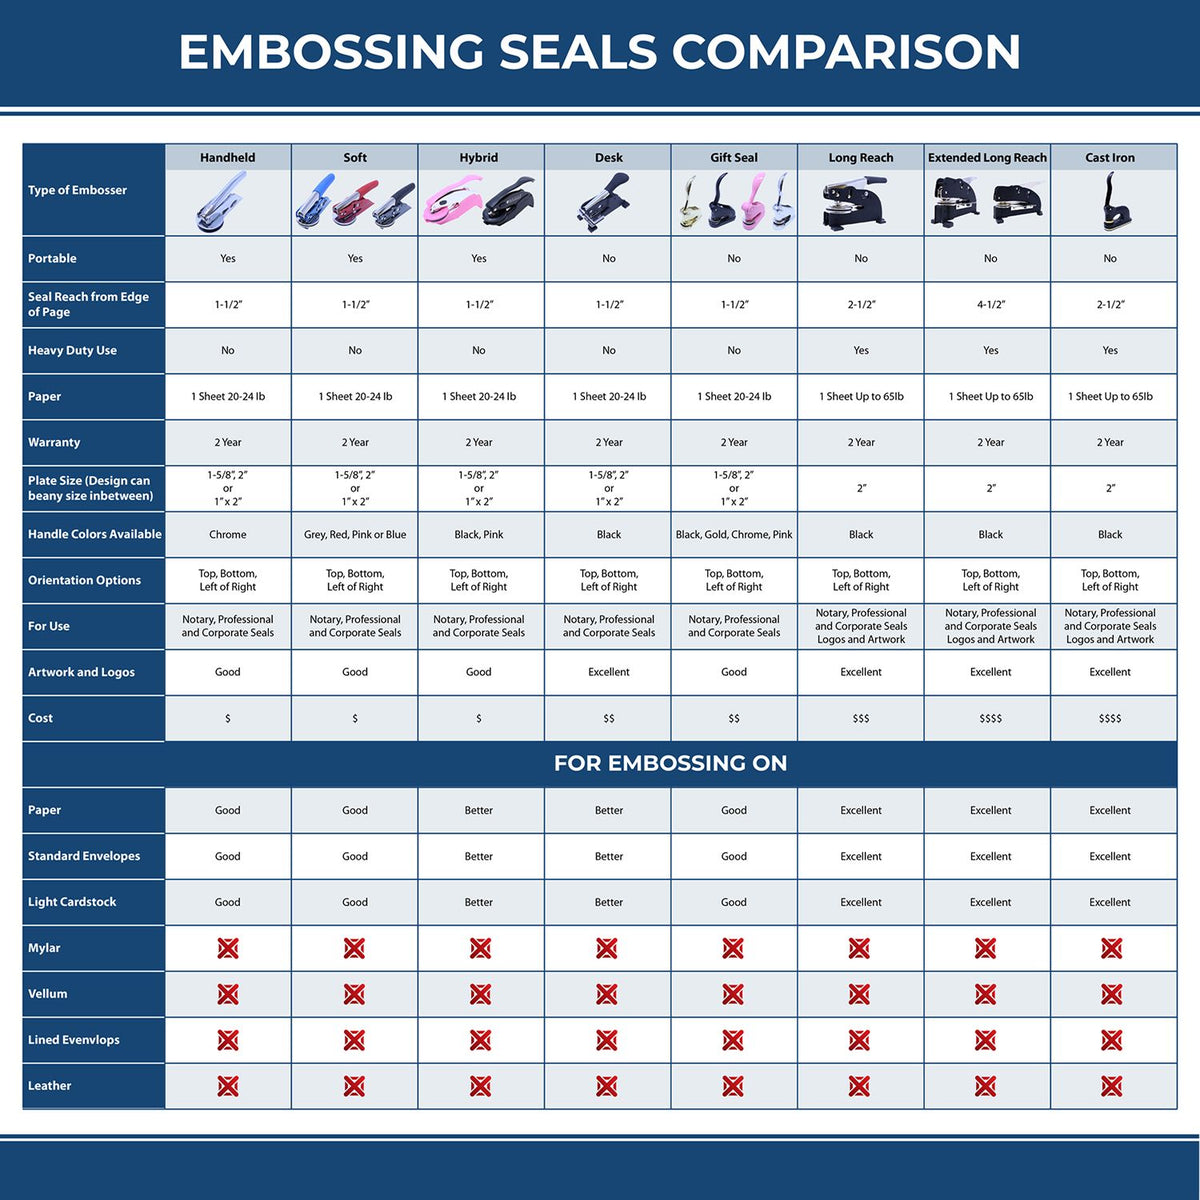 A comparison chart for the different types of mount models available for the State of Nebraska Soft Land Surveyor Embossing Seal.